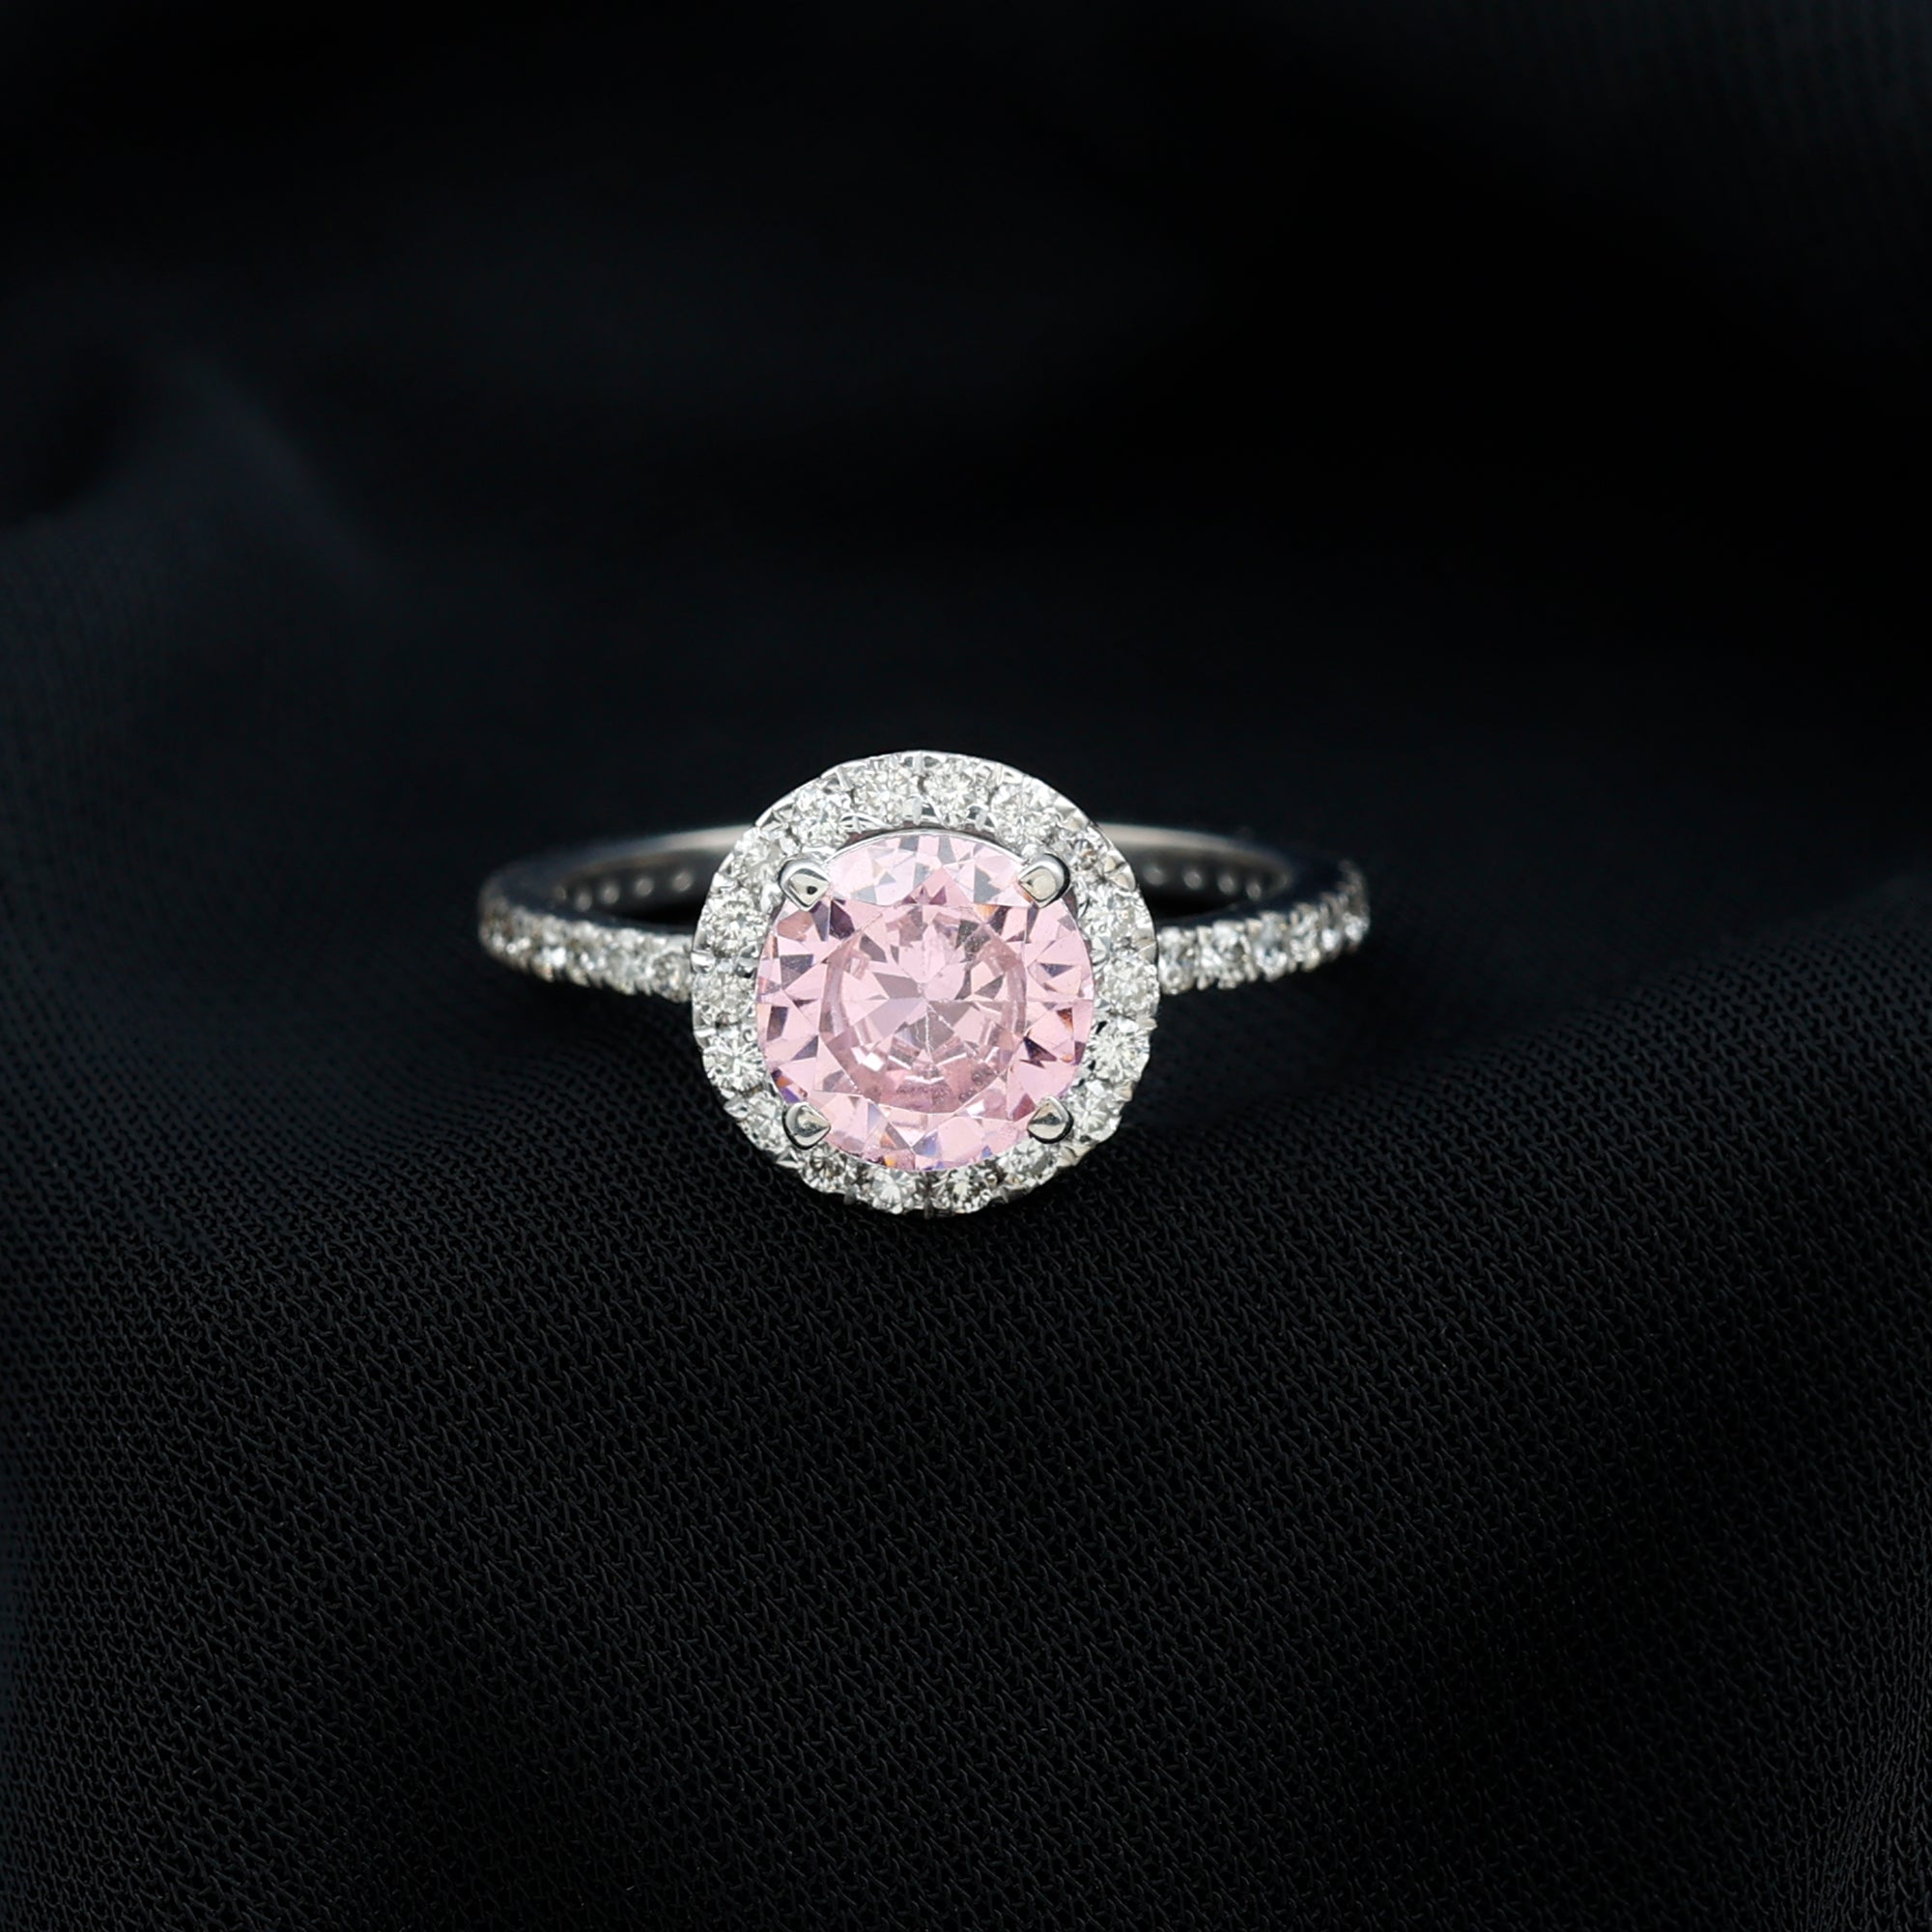 Round Lab Created Pink Sapphire Halo Engagement Ring with Diamond Lab Created Pink Sapphire - ( AAAA ) - Quality 92.5 Sterling Silver 7.5 - Rosec Jewels